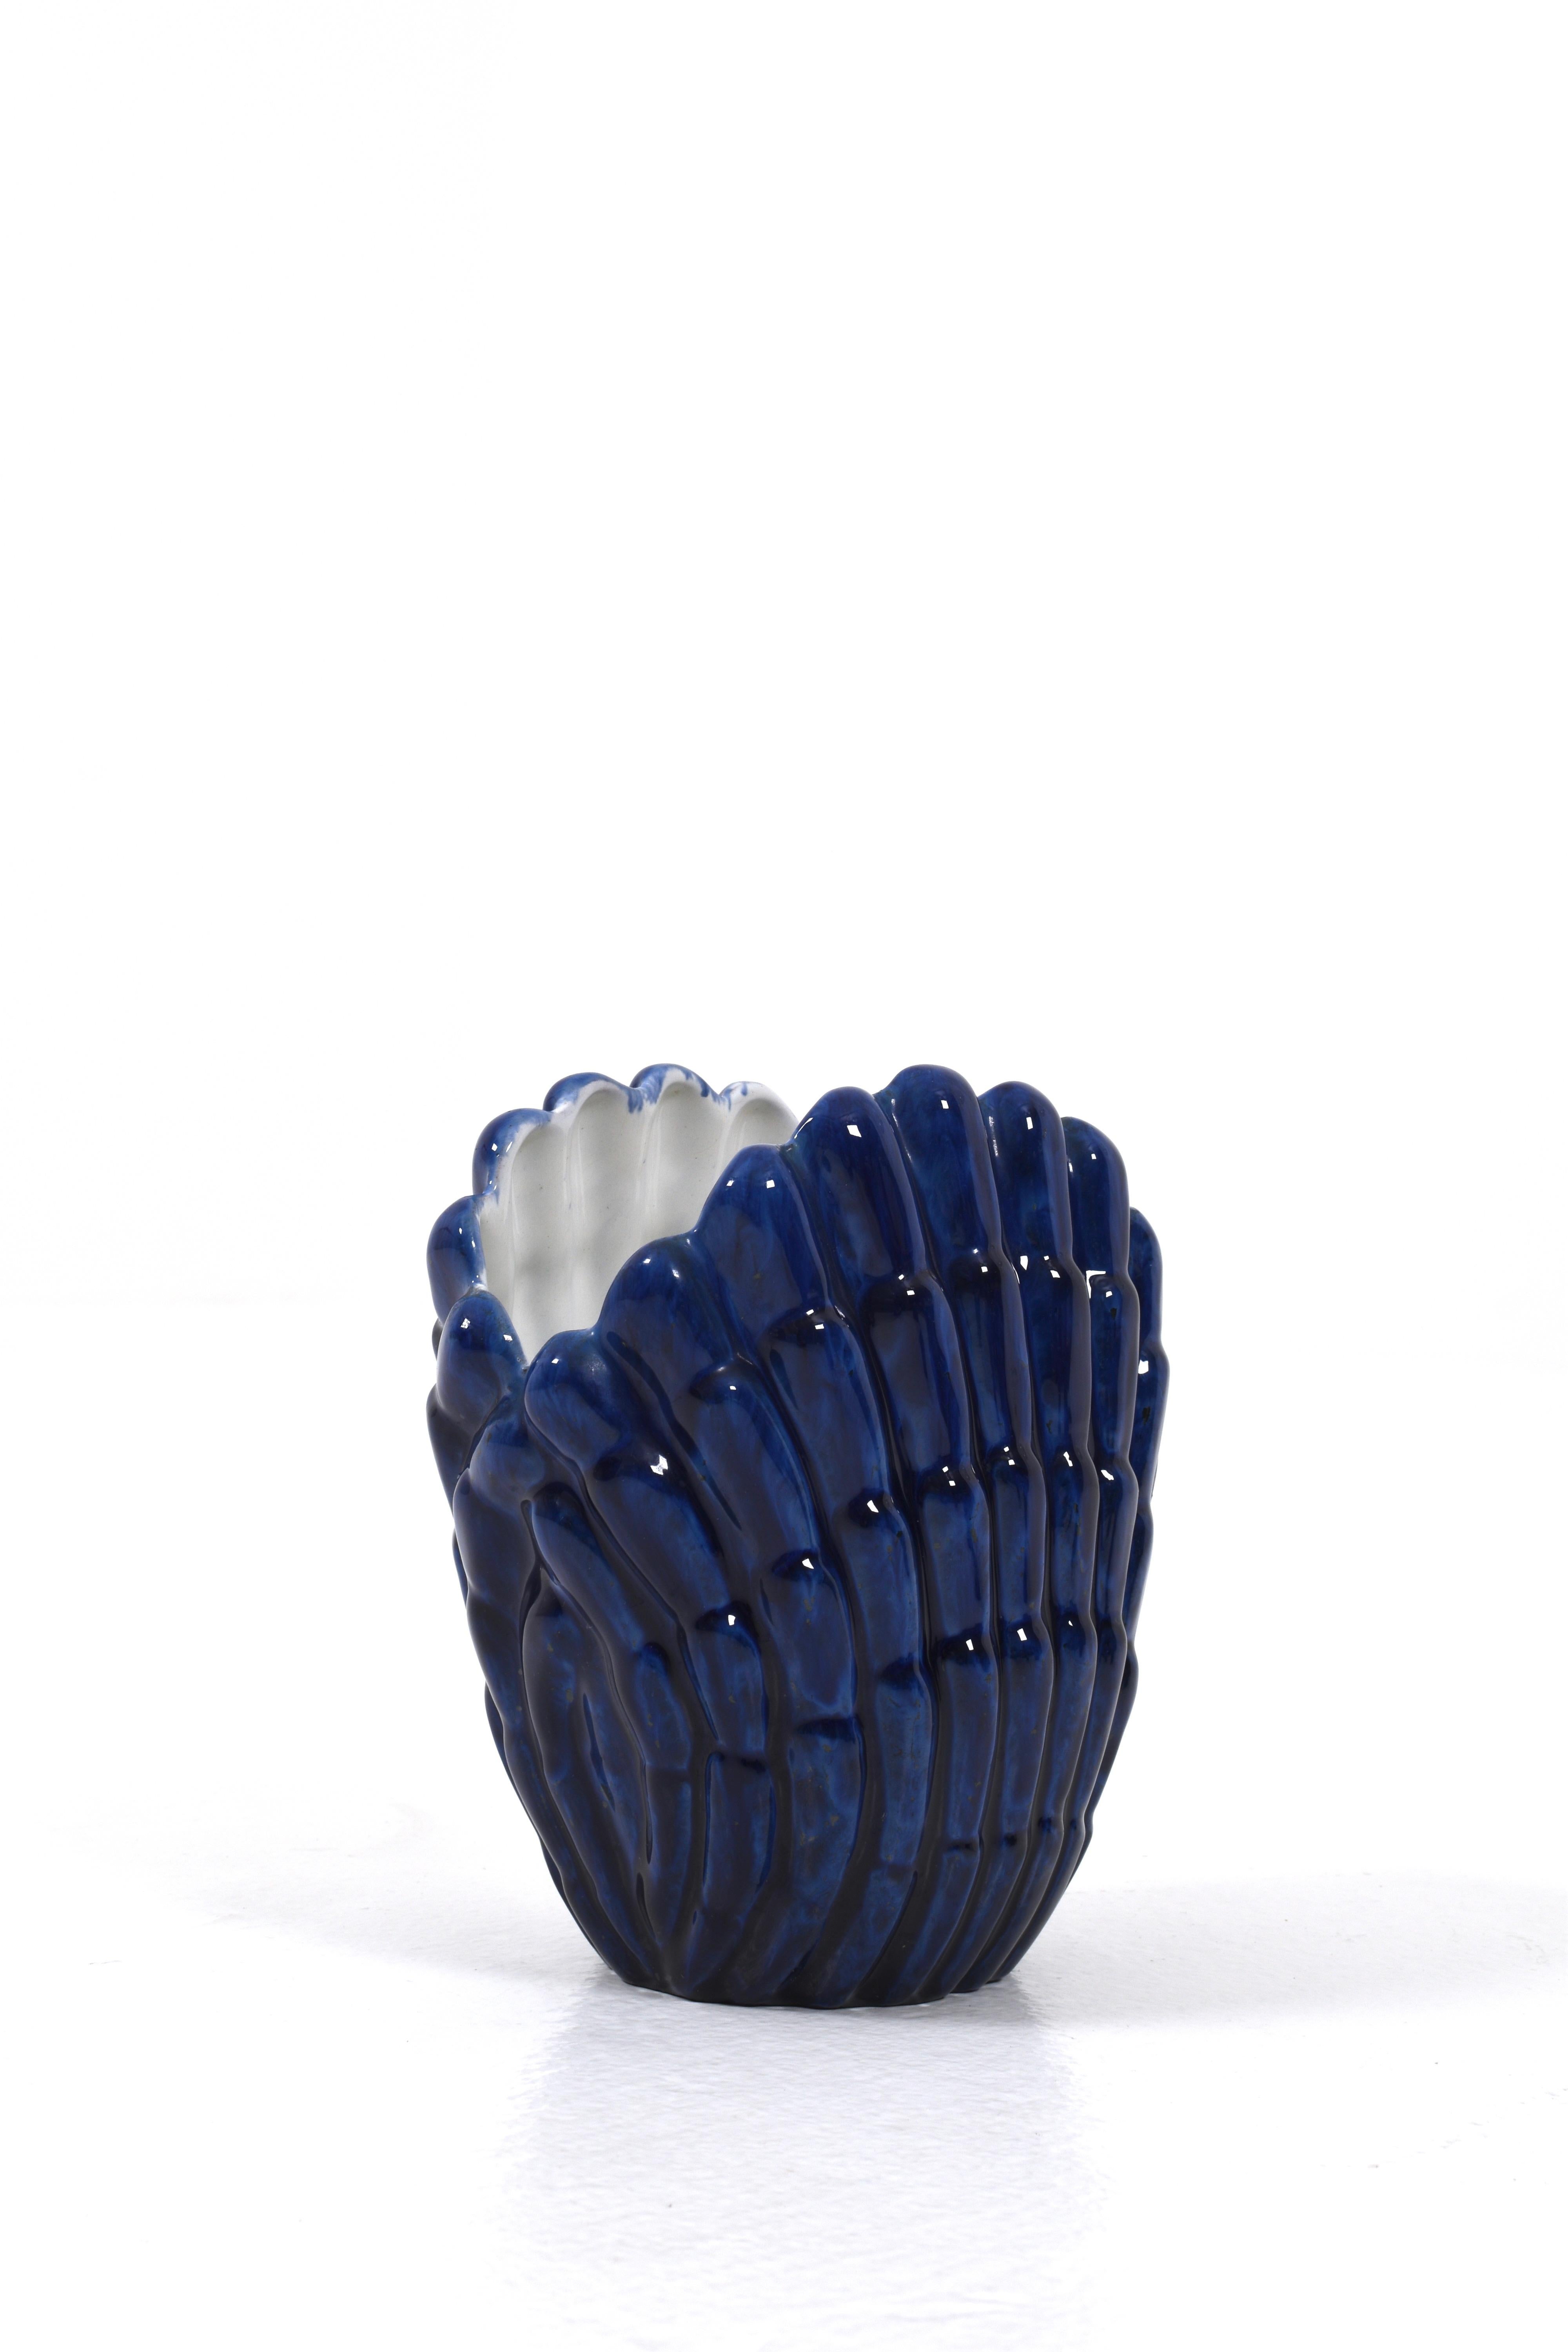 Mid-20th Century Shell vase by Vicke Lindstrand for Upsala-Ekeby, 1940s For Sale